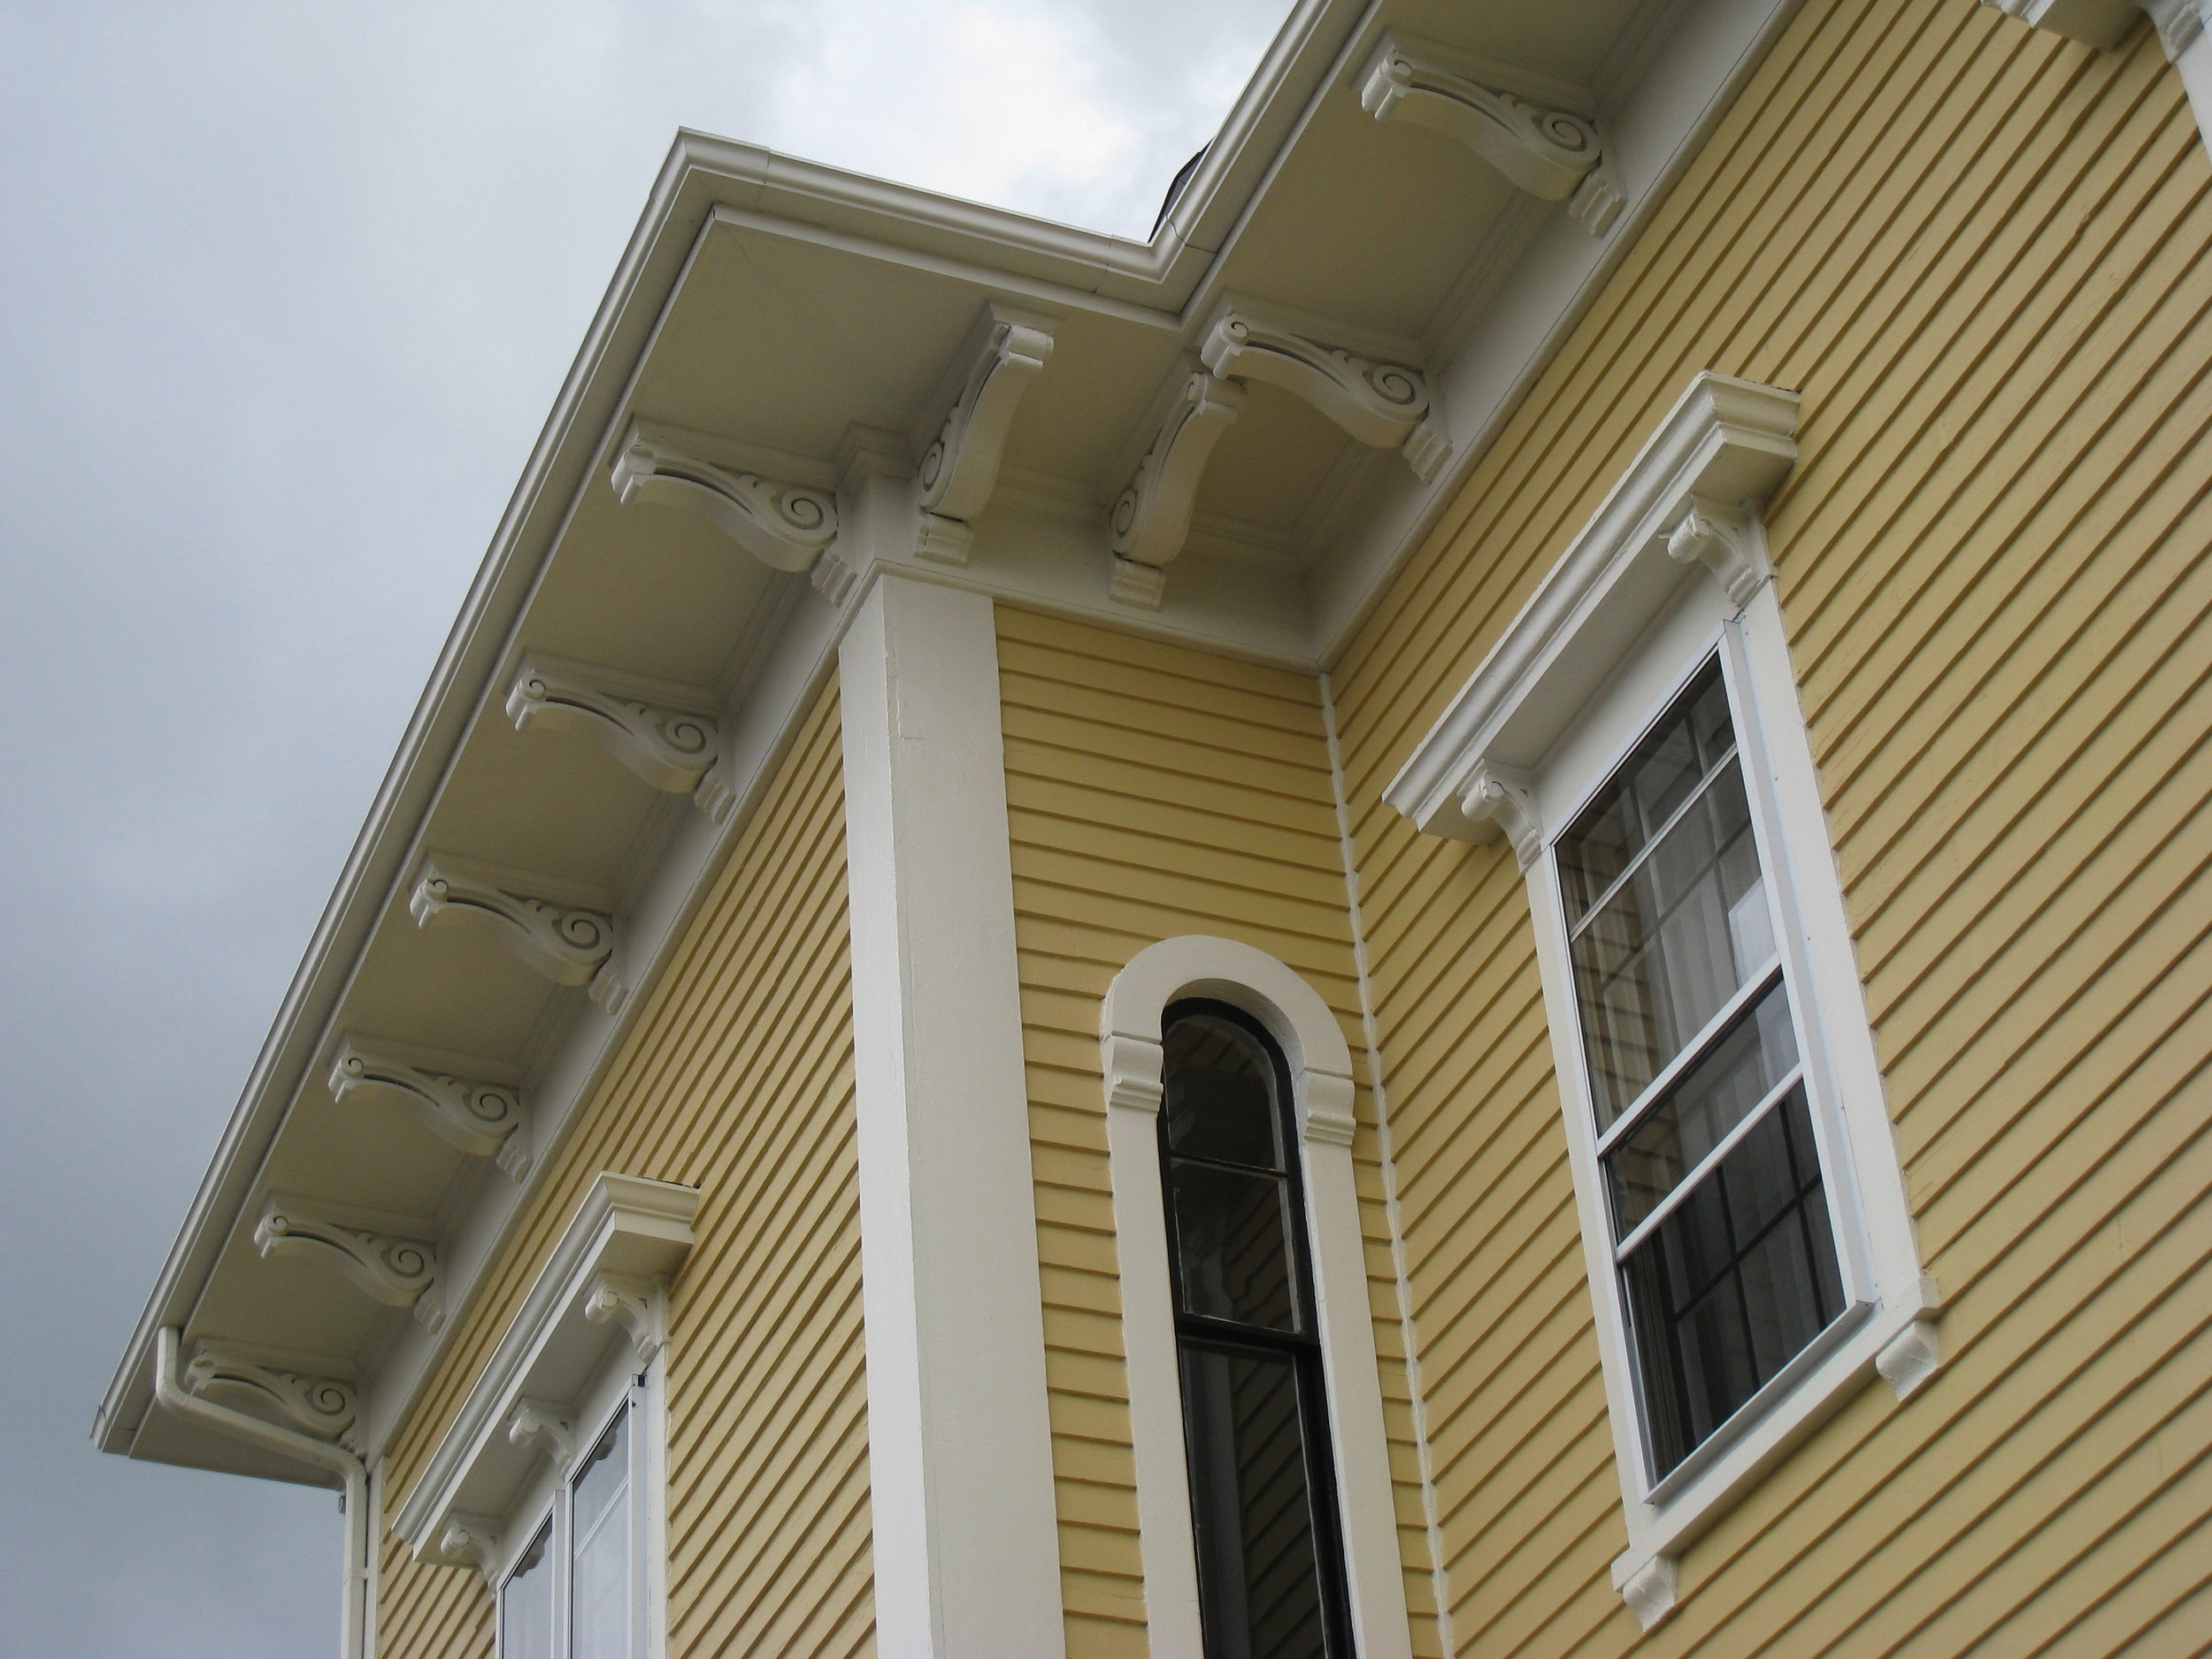  Restored cornice and roof, 2003  Photo credit: Clark Schoettle, Providence Revolving Fund  